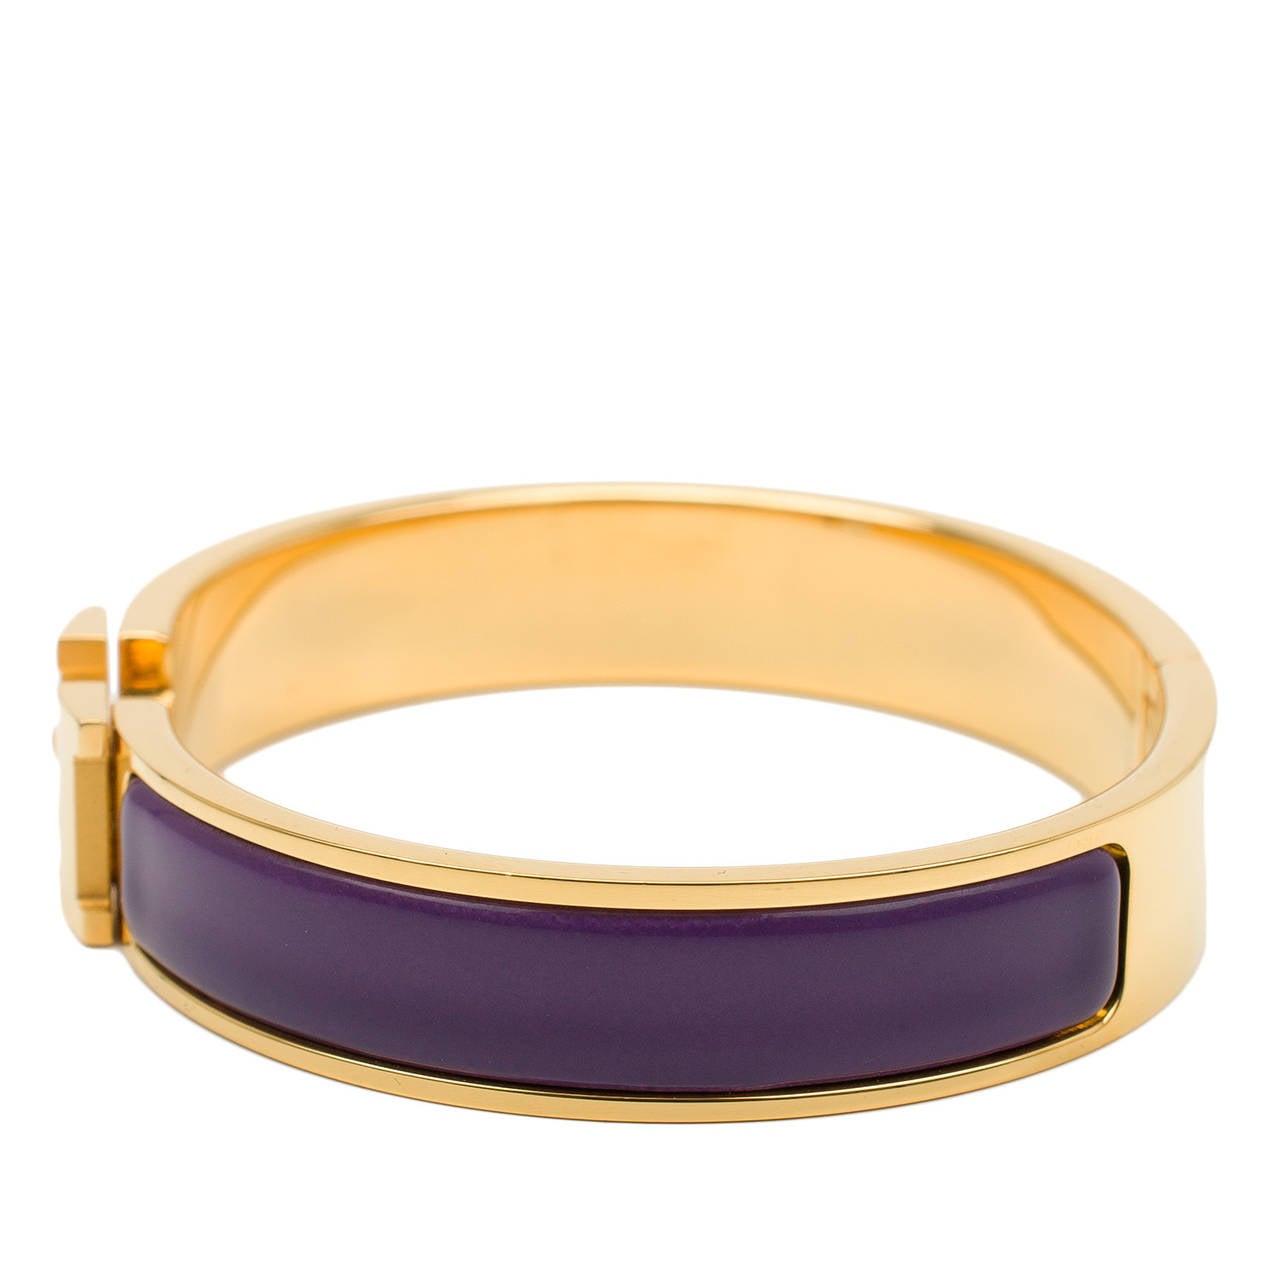 Hermes narrow Clic Clac H bracelet in purple enamel with gold plated hardware in size GM.

Hermes is renowned for its enamel and leather bracelets. Hermes printed enamel bangles, enamel Clic Clac H bracelets, and leather/exotic Collier de Chien